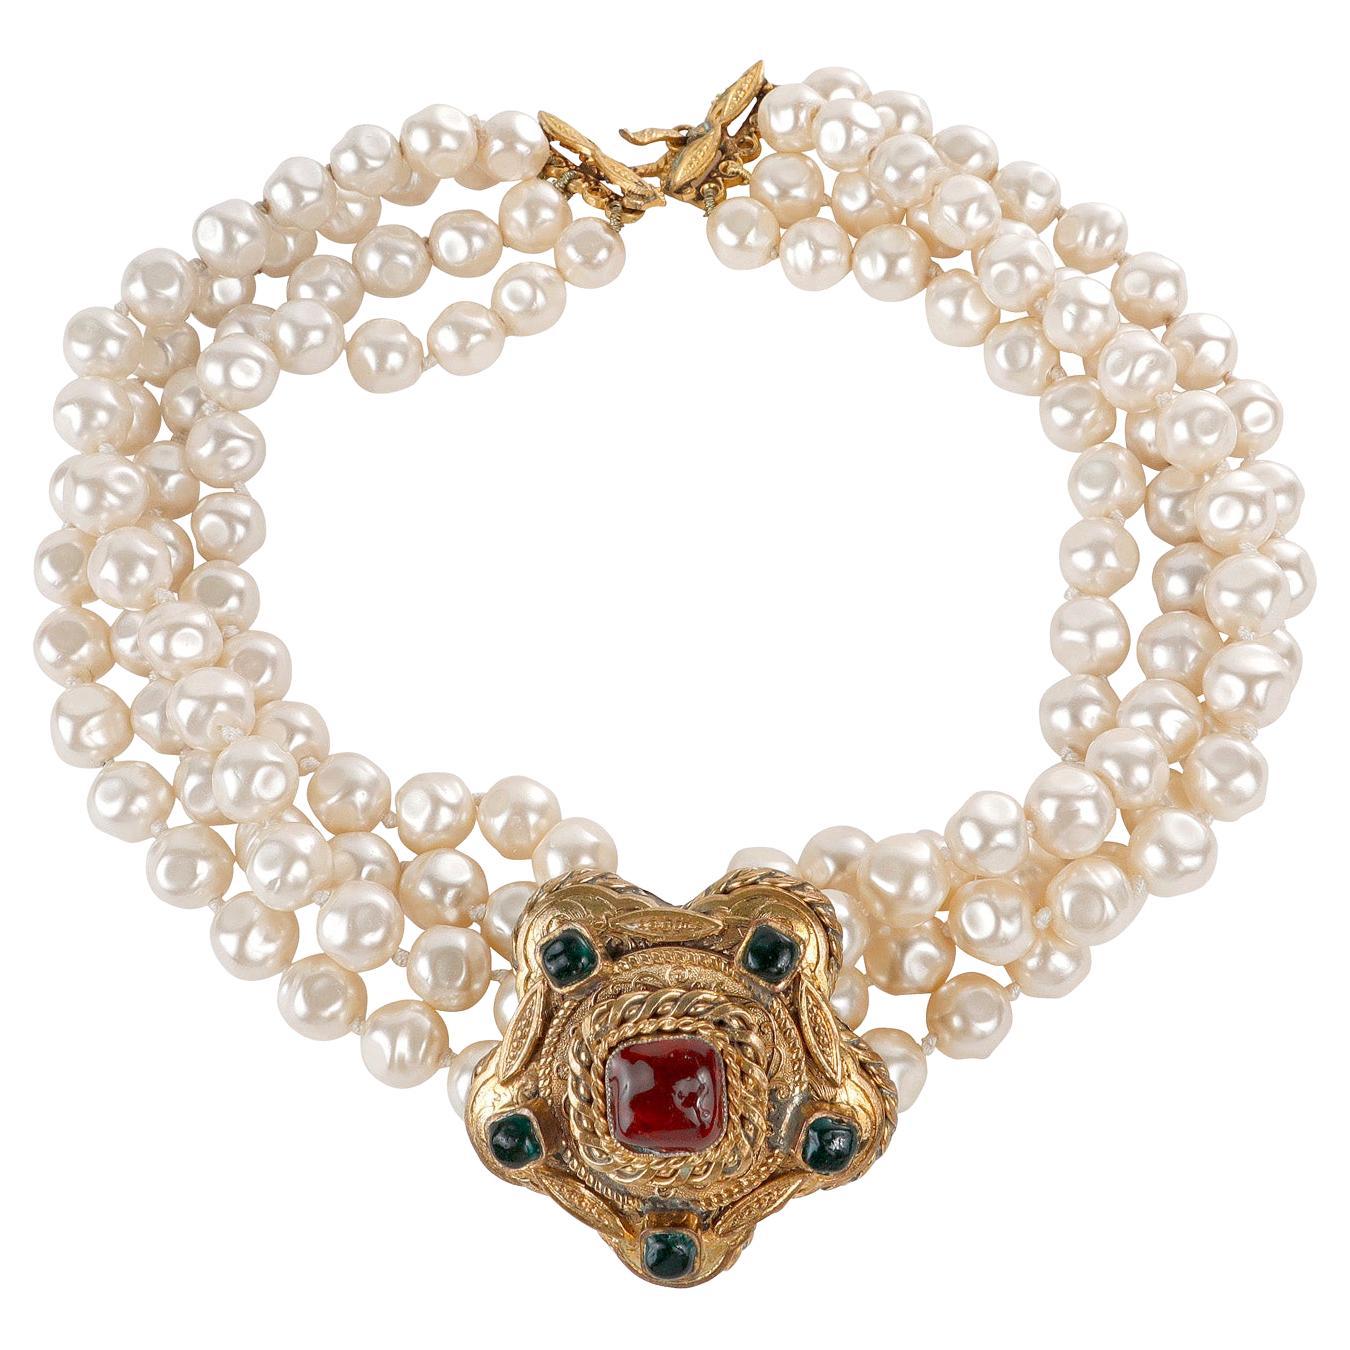 Chanel Vintage Multi Strand Pearl and Gripoix Choker